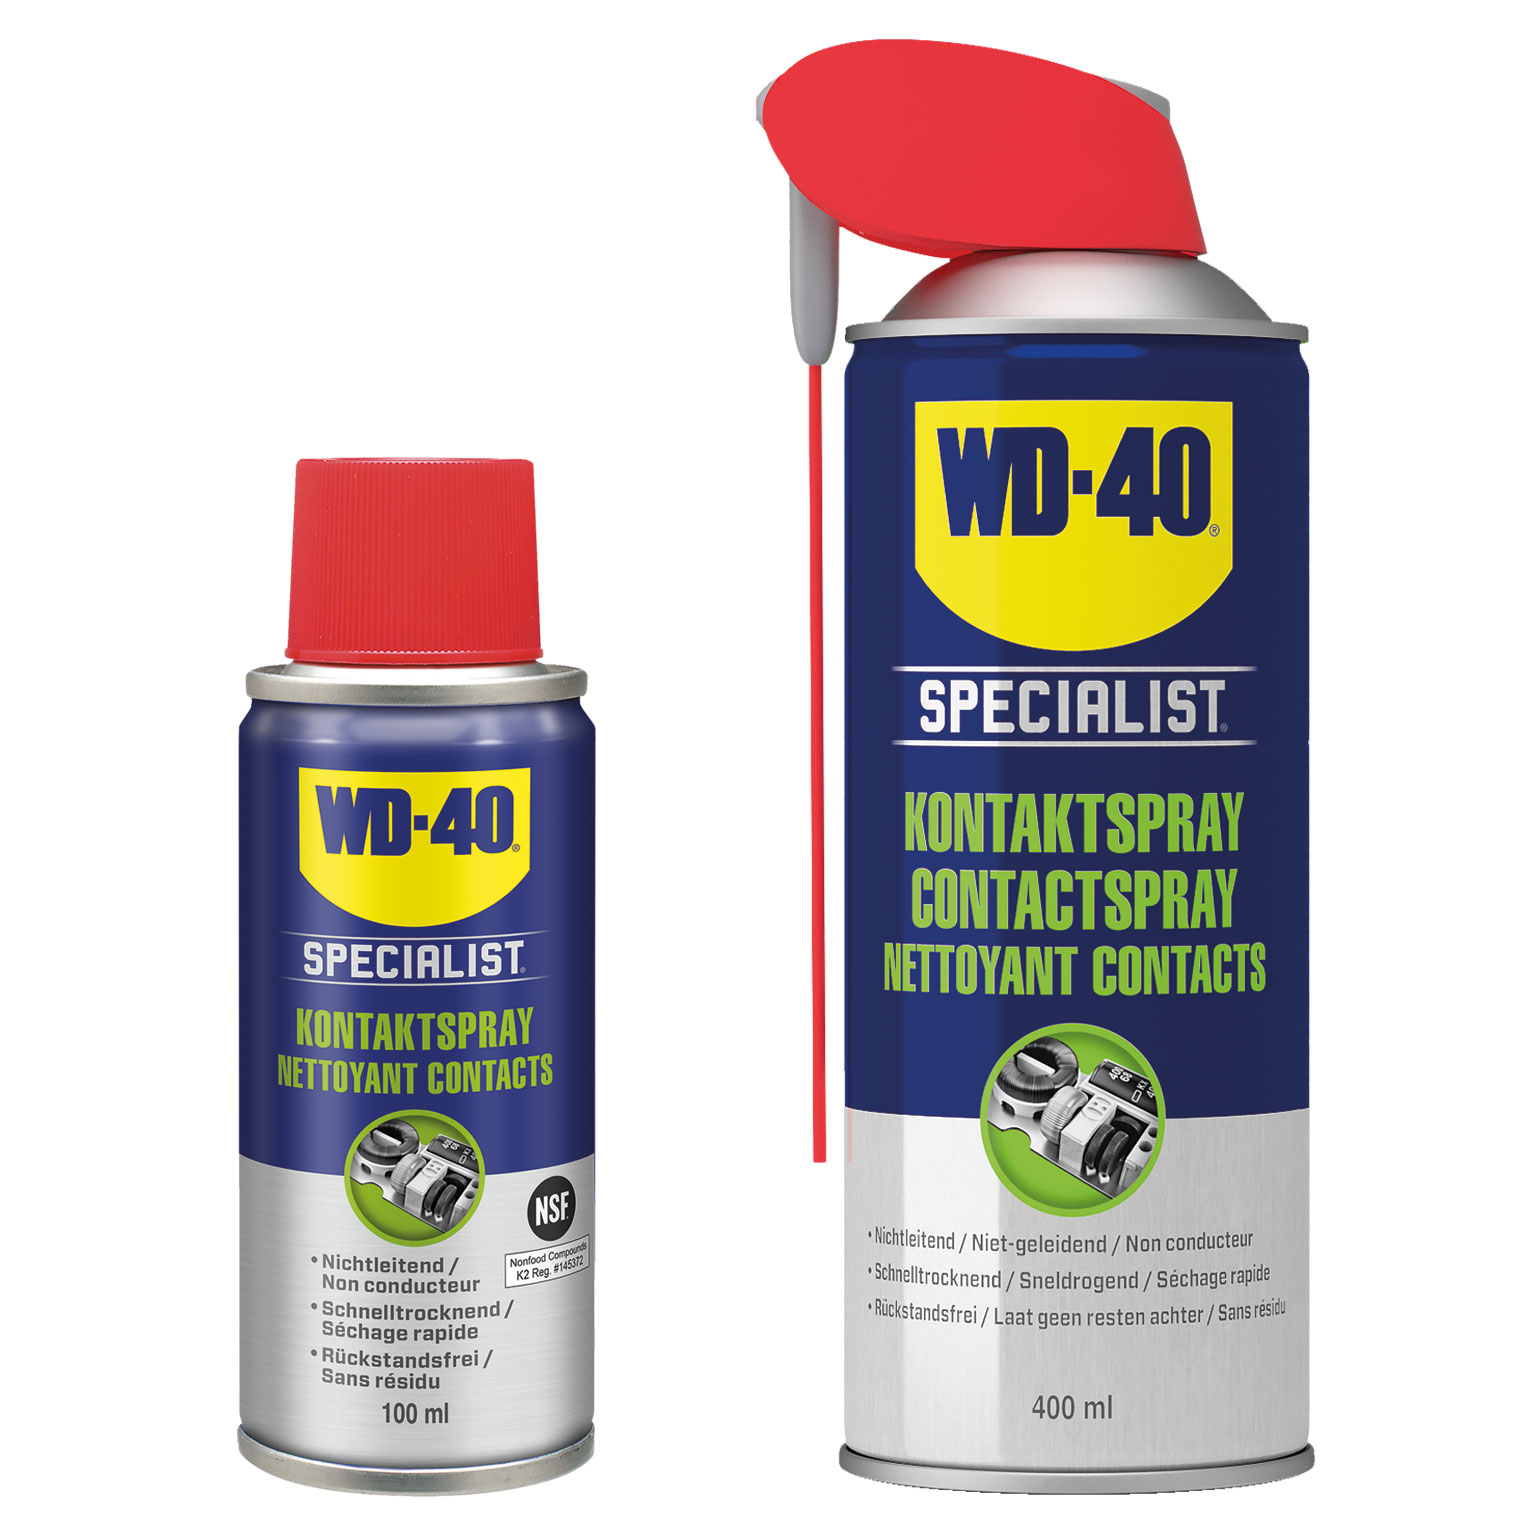 WD-40 Specialist Contact spray 100ml spray can - online purchase